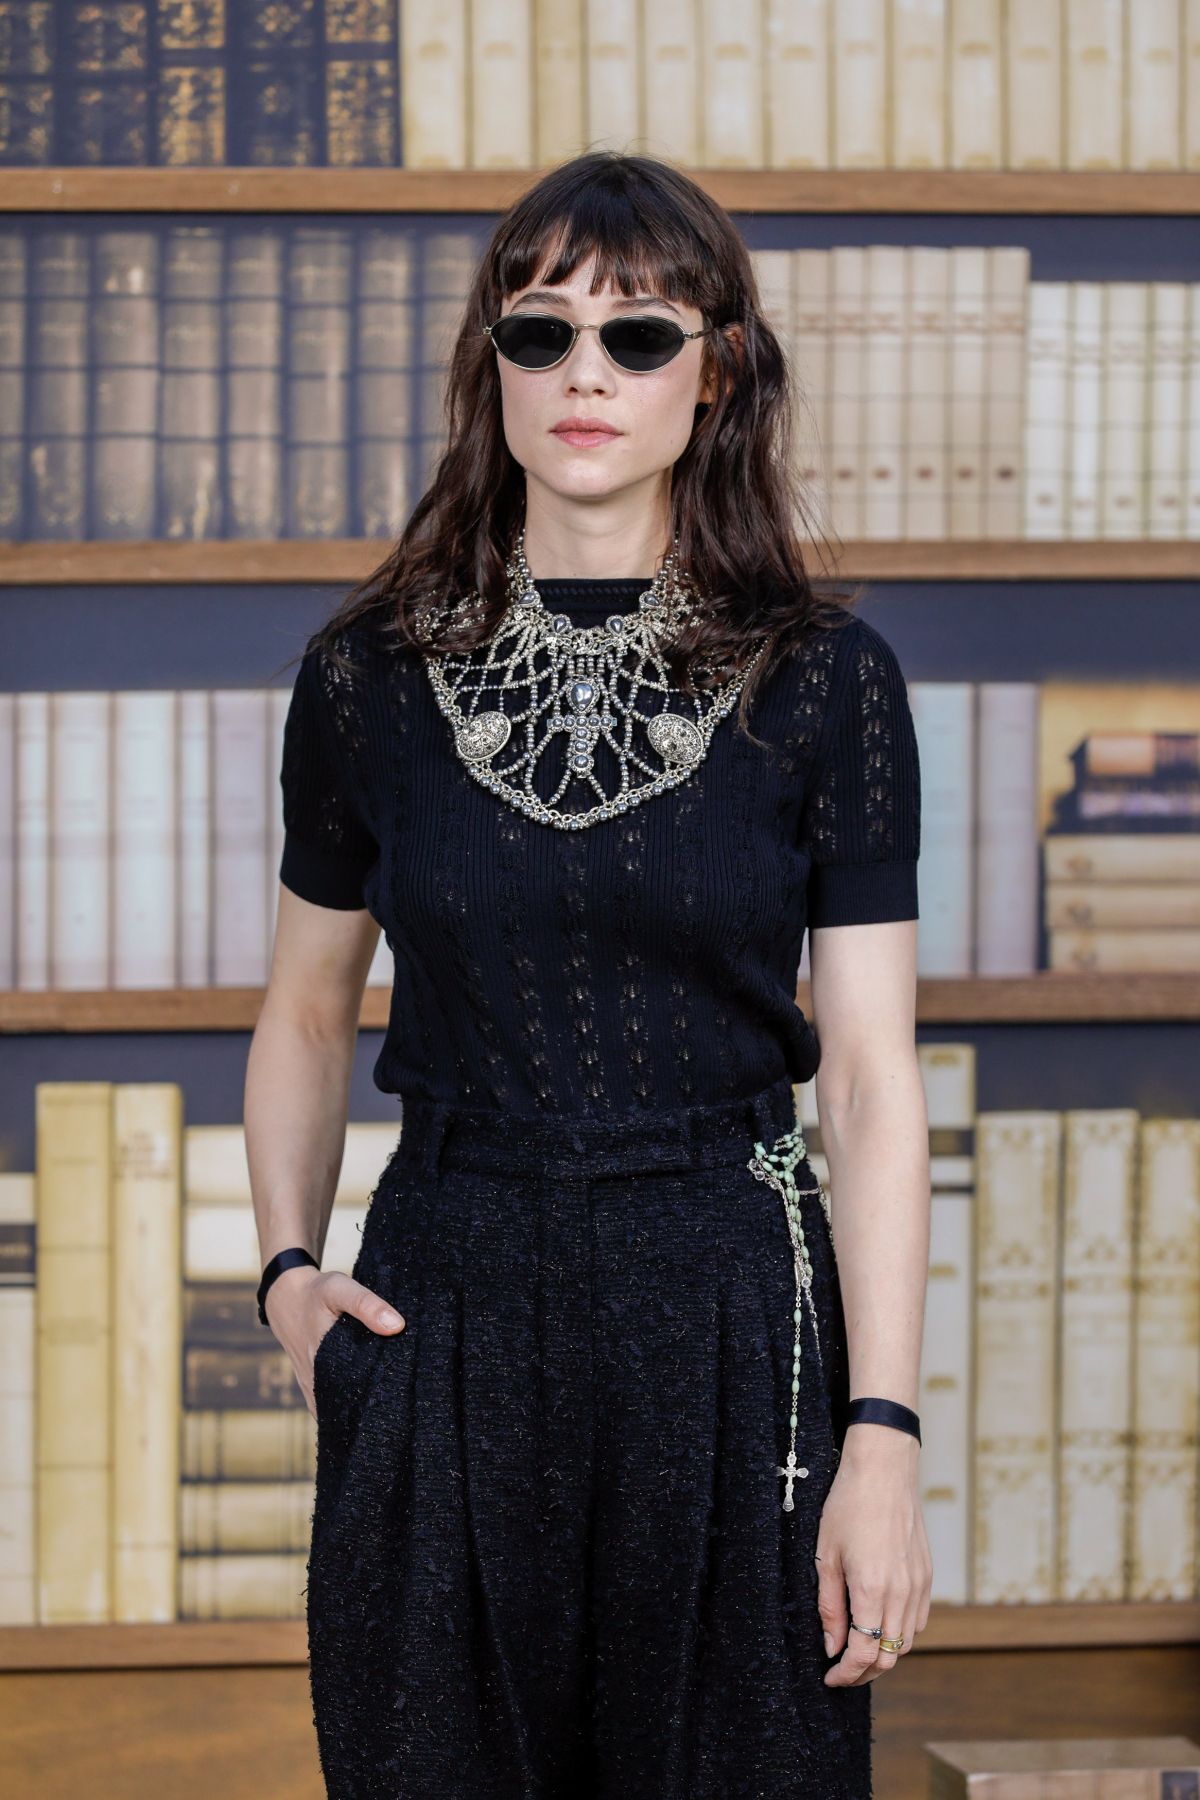 ASTRID BERGES-FRISBEY at Chanel Haute Couture Fall/Winter 2019/2020 ...